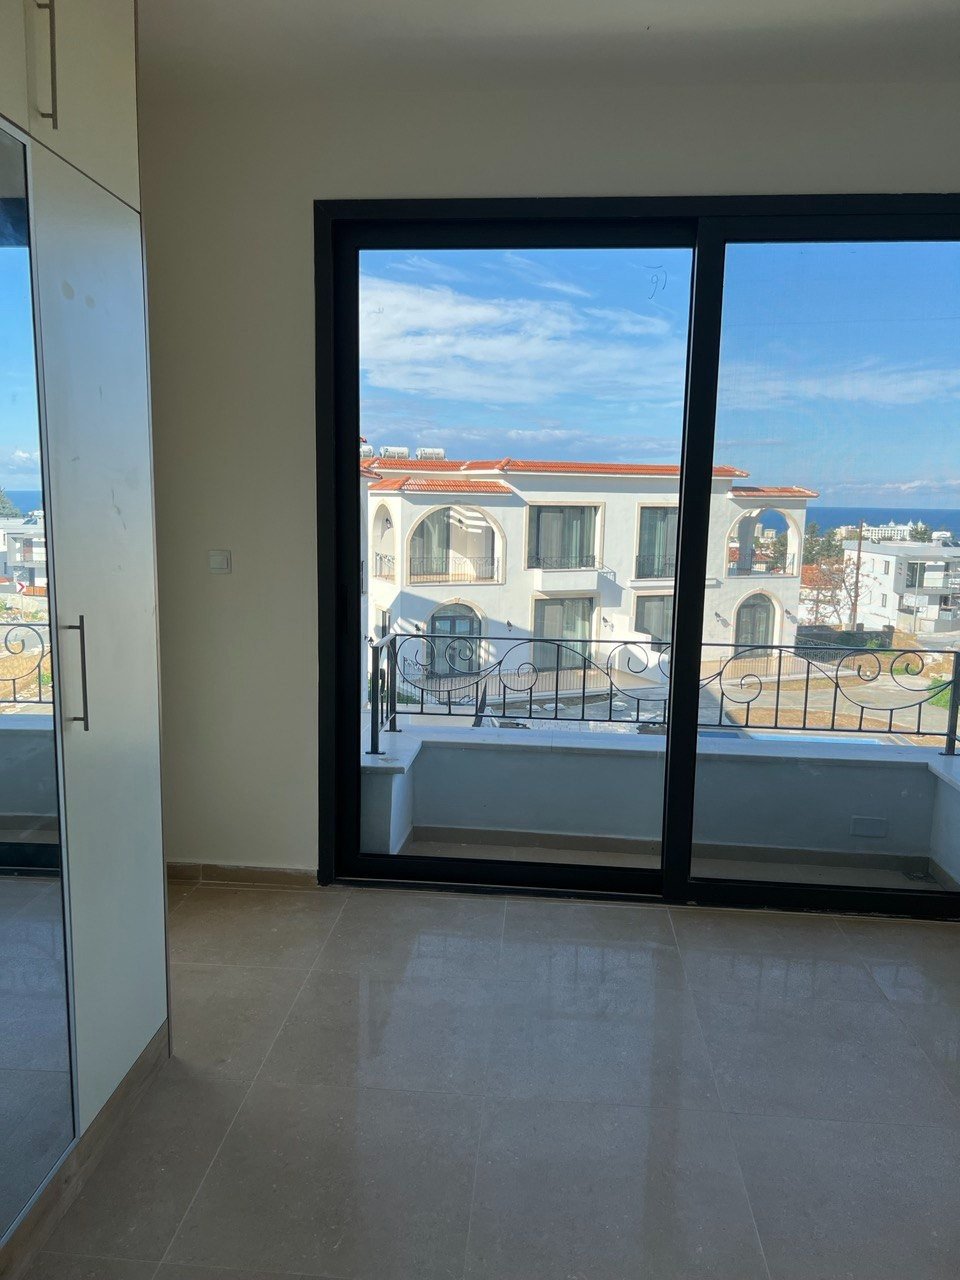 2 Bedroom Townhouse for sale in Kyrenia,Alsancak-bfd47a4e-6d29-4595-a2d6-9805254637ed